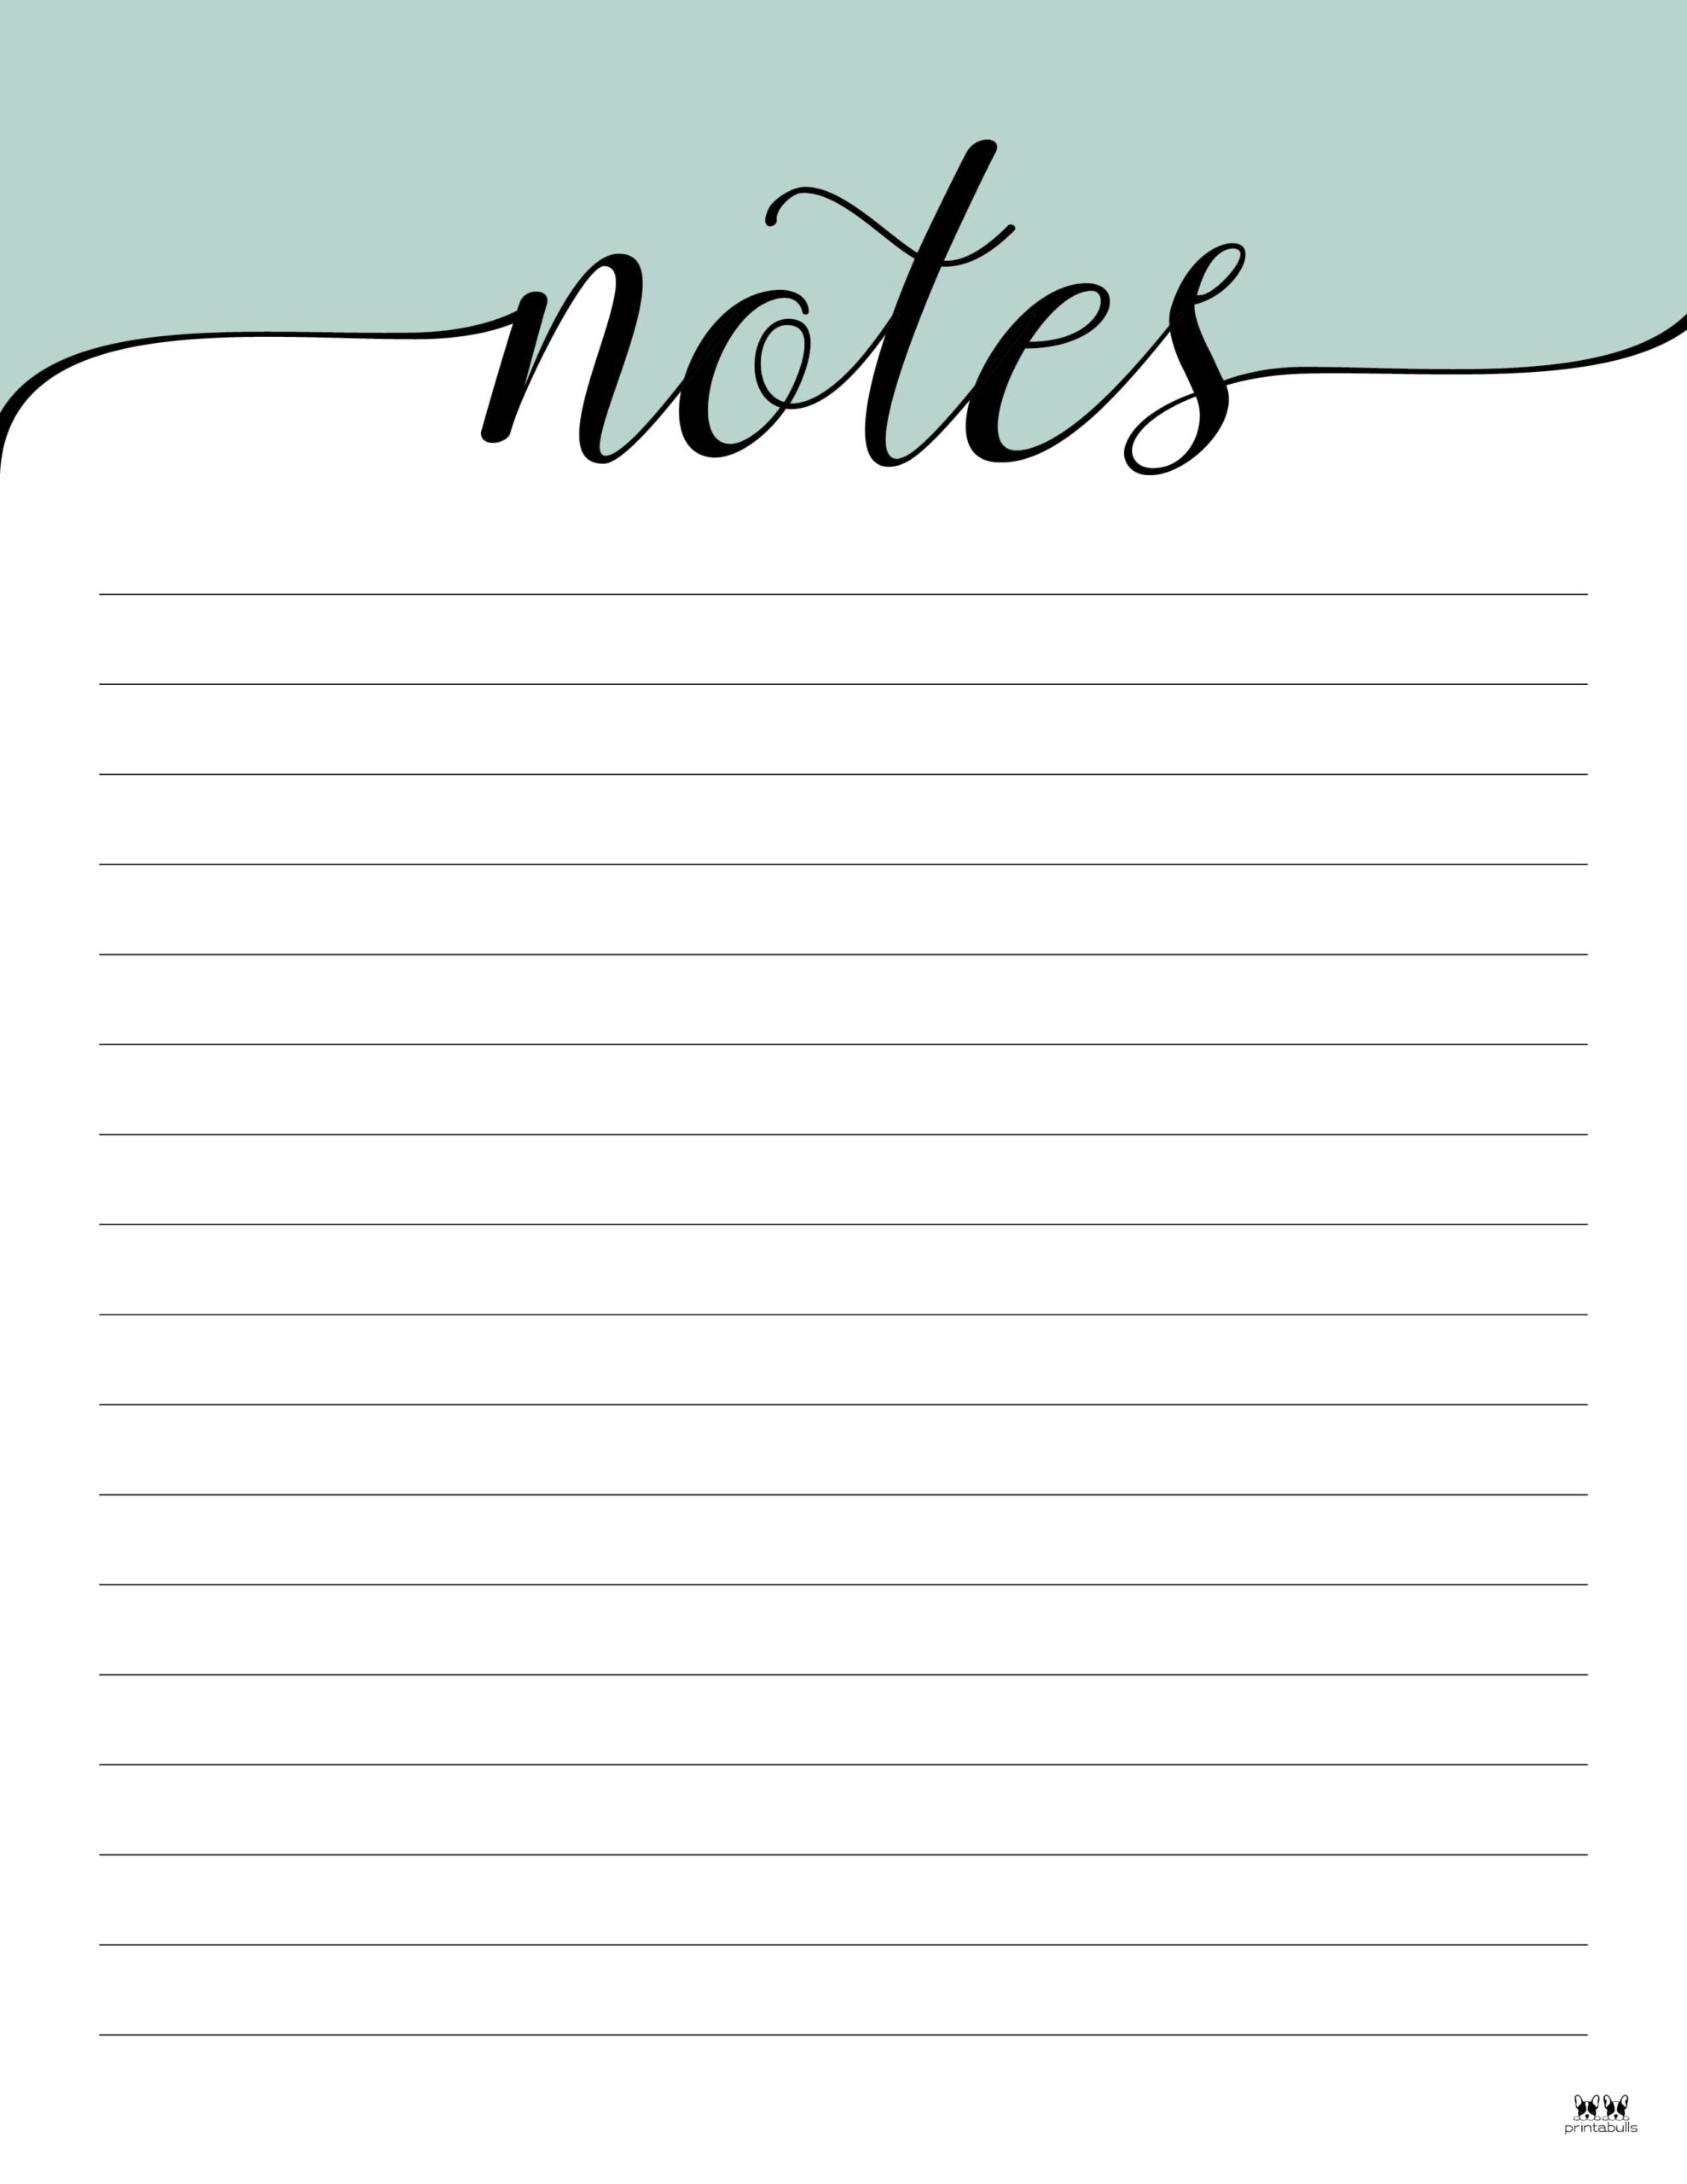 Note Pages & Templates 30 FREE Printables PrintaBulk